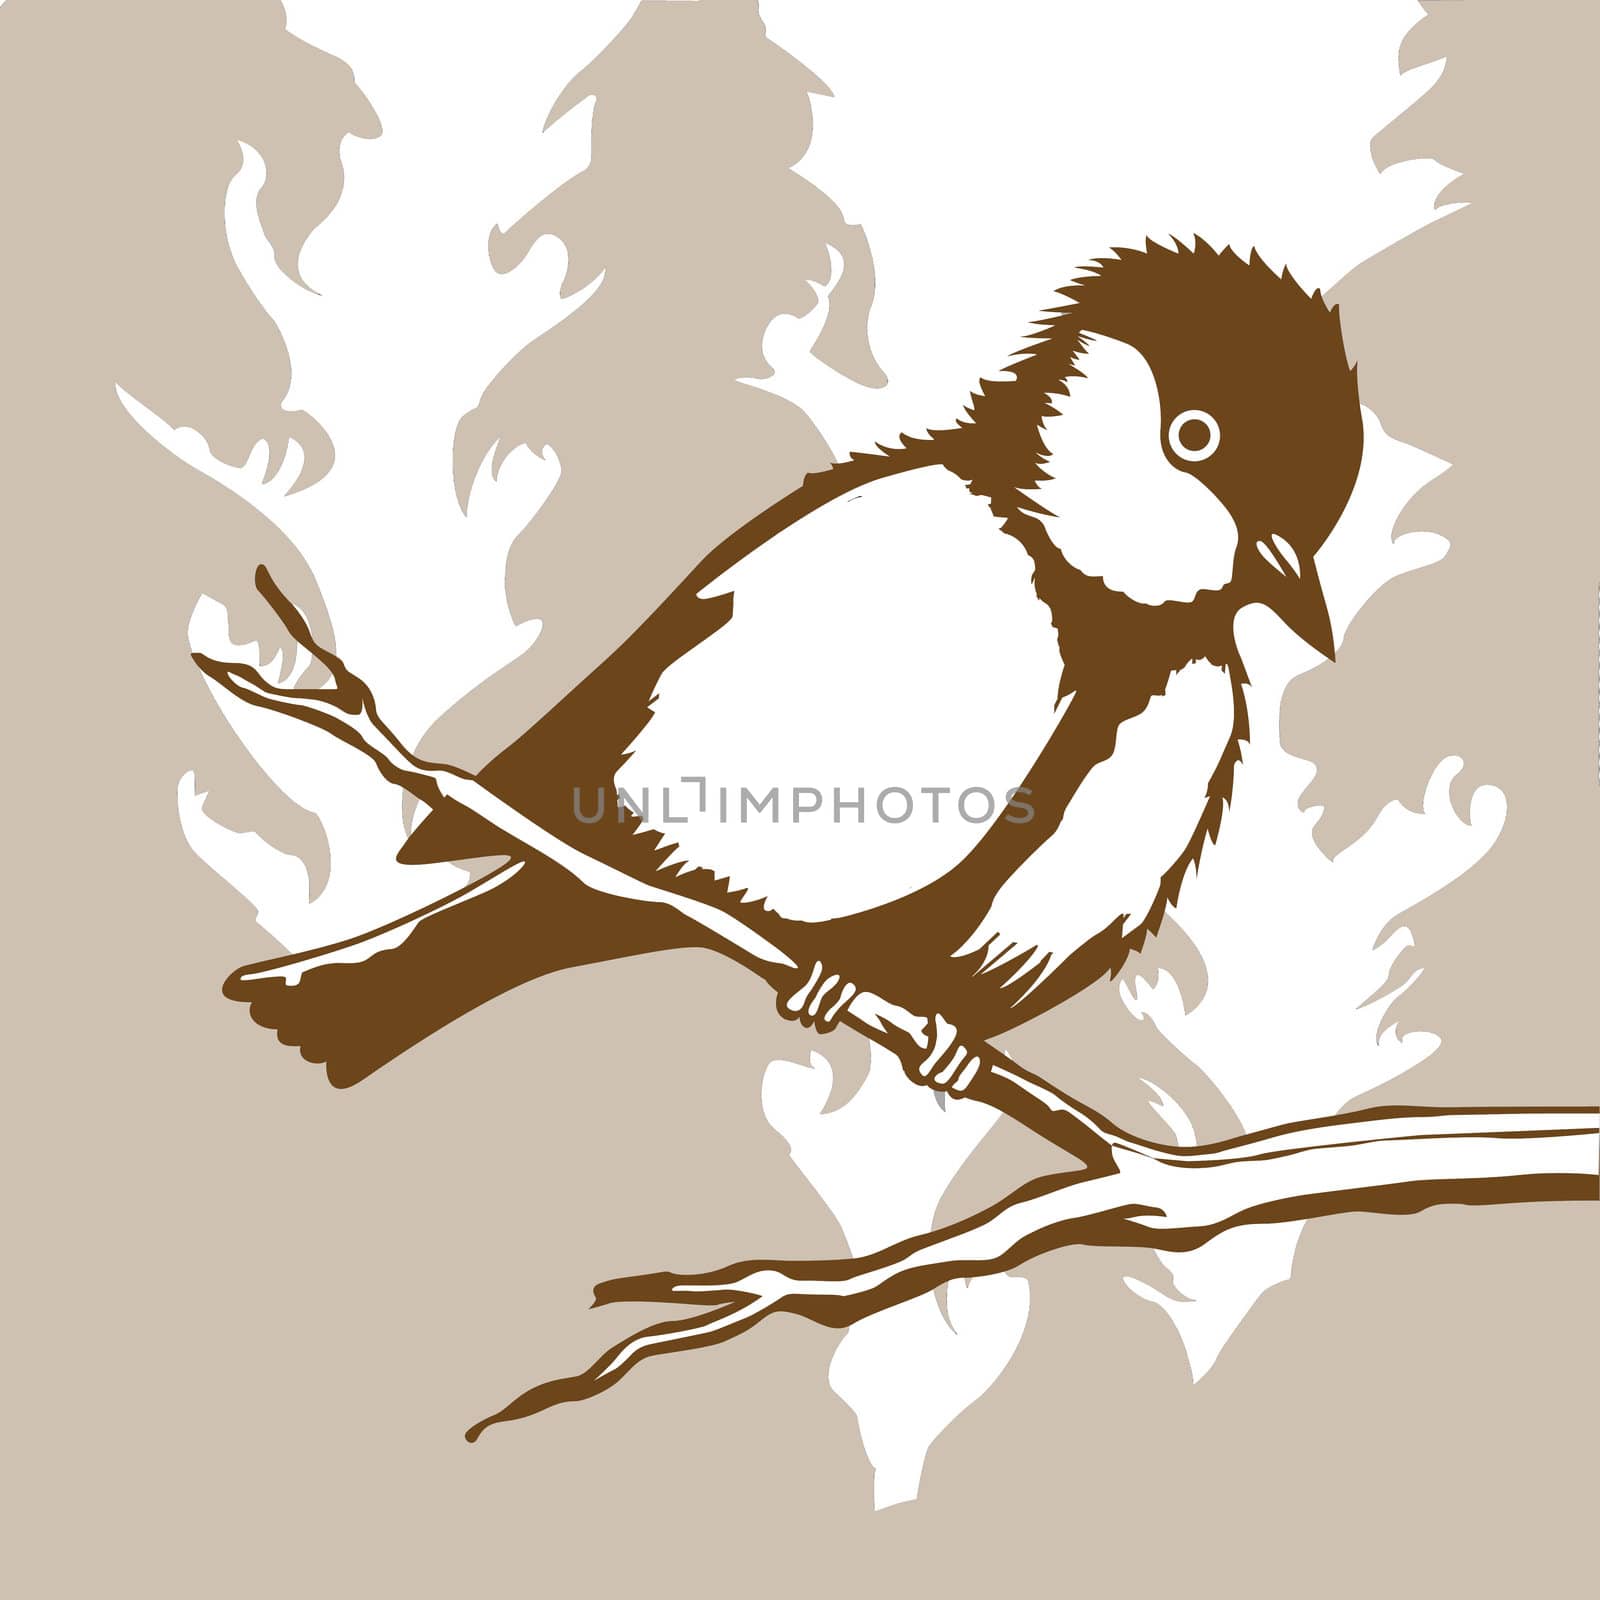 bird silhouette on wood background by basel101658